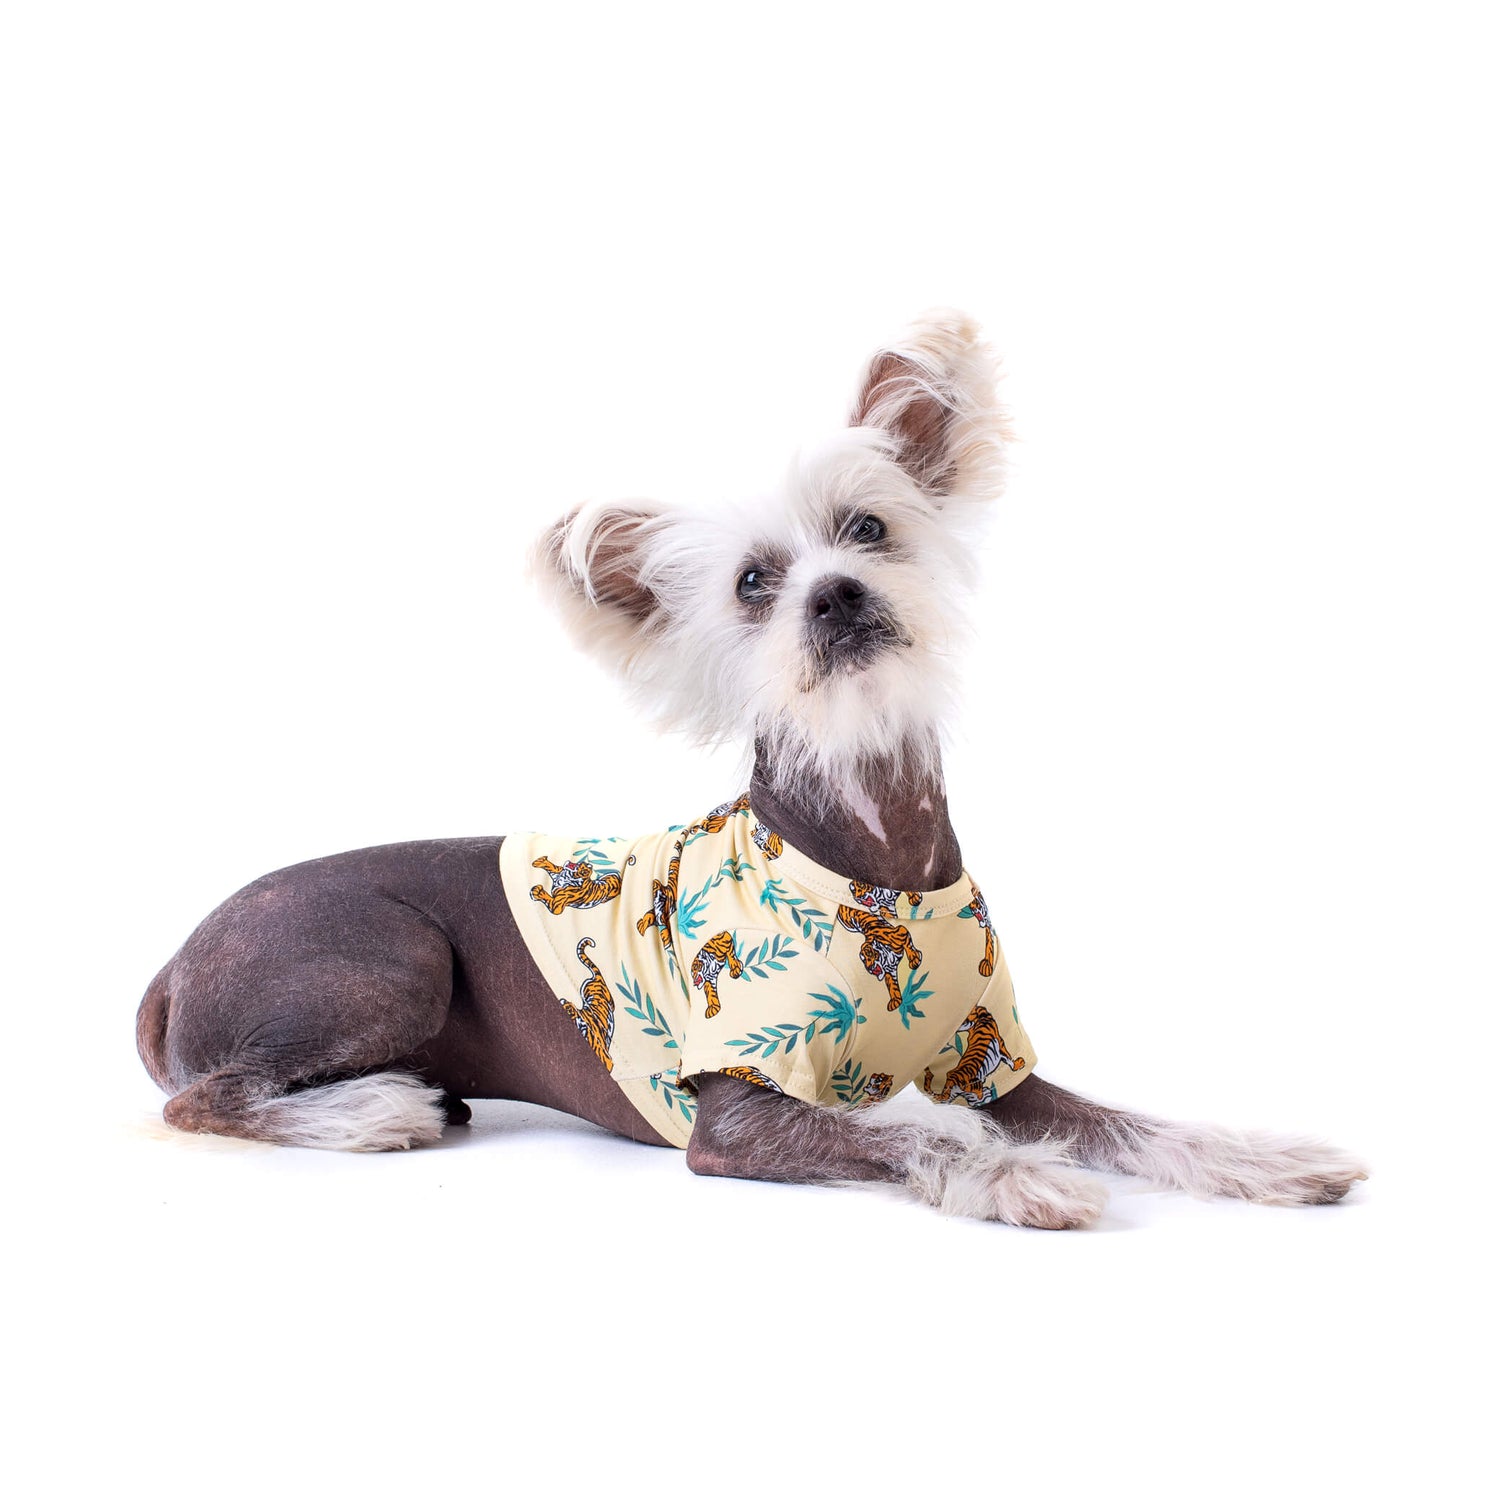 Chinese Crested dog wearing a vibrant yellow Wild Child shirt for dogs with orange tiger prints - Shop stylish dog shirts and clothing for dogs at Vibrant Hound